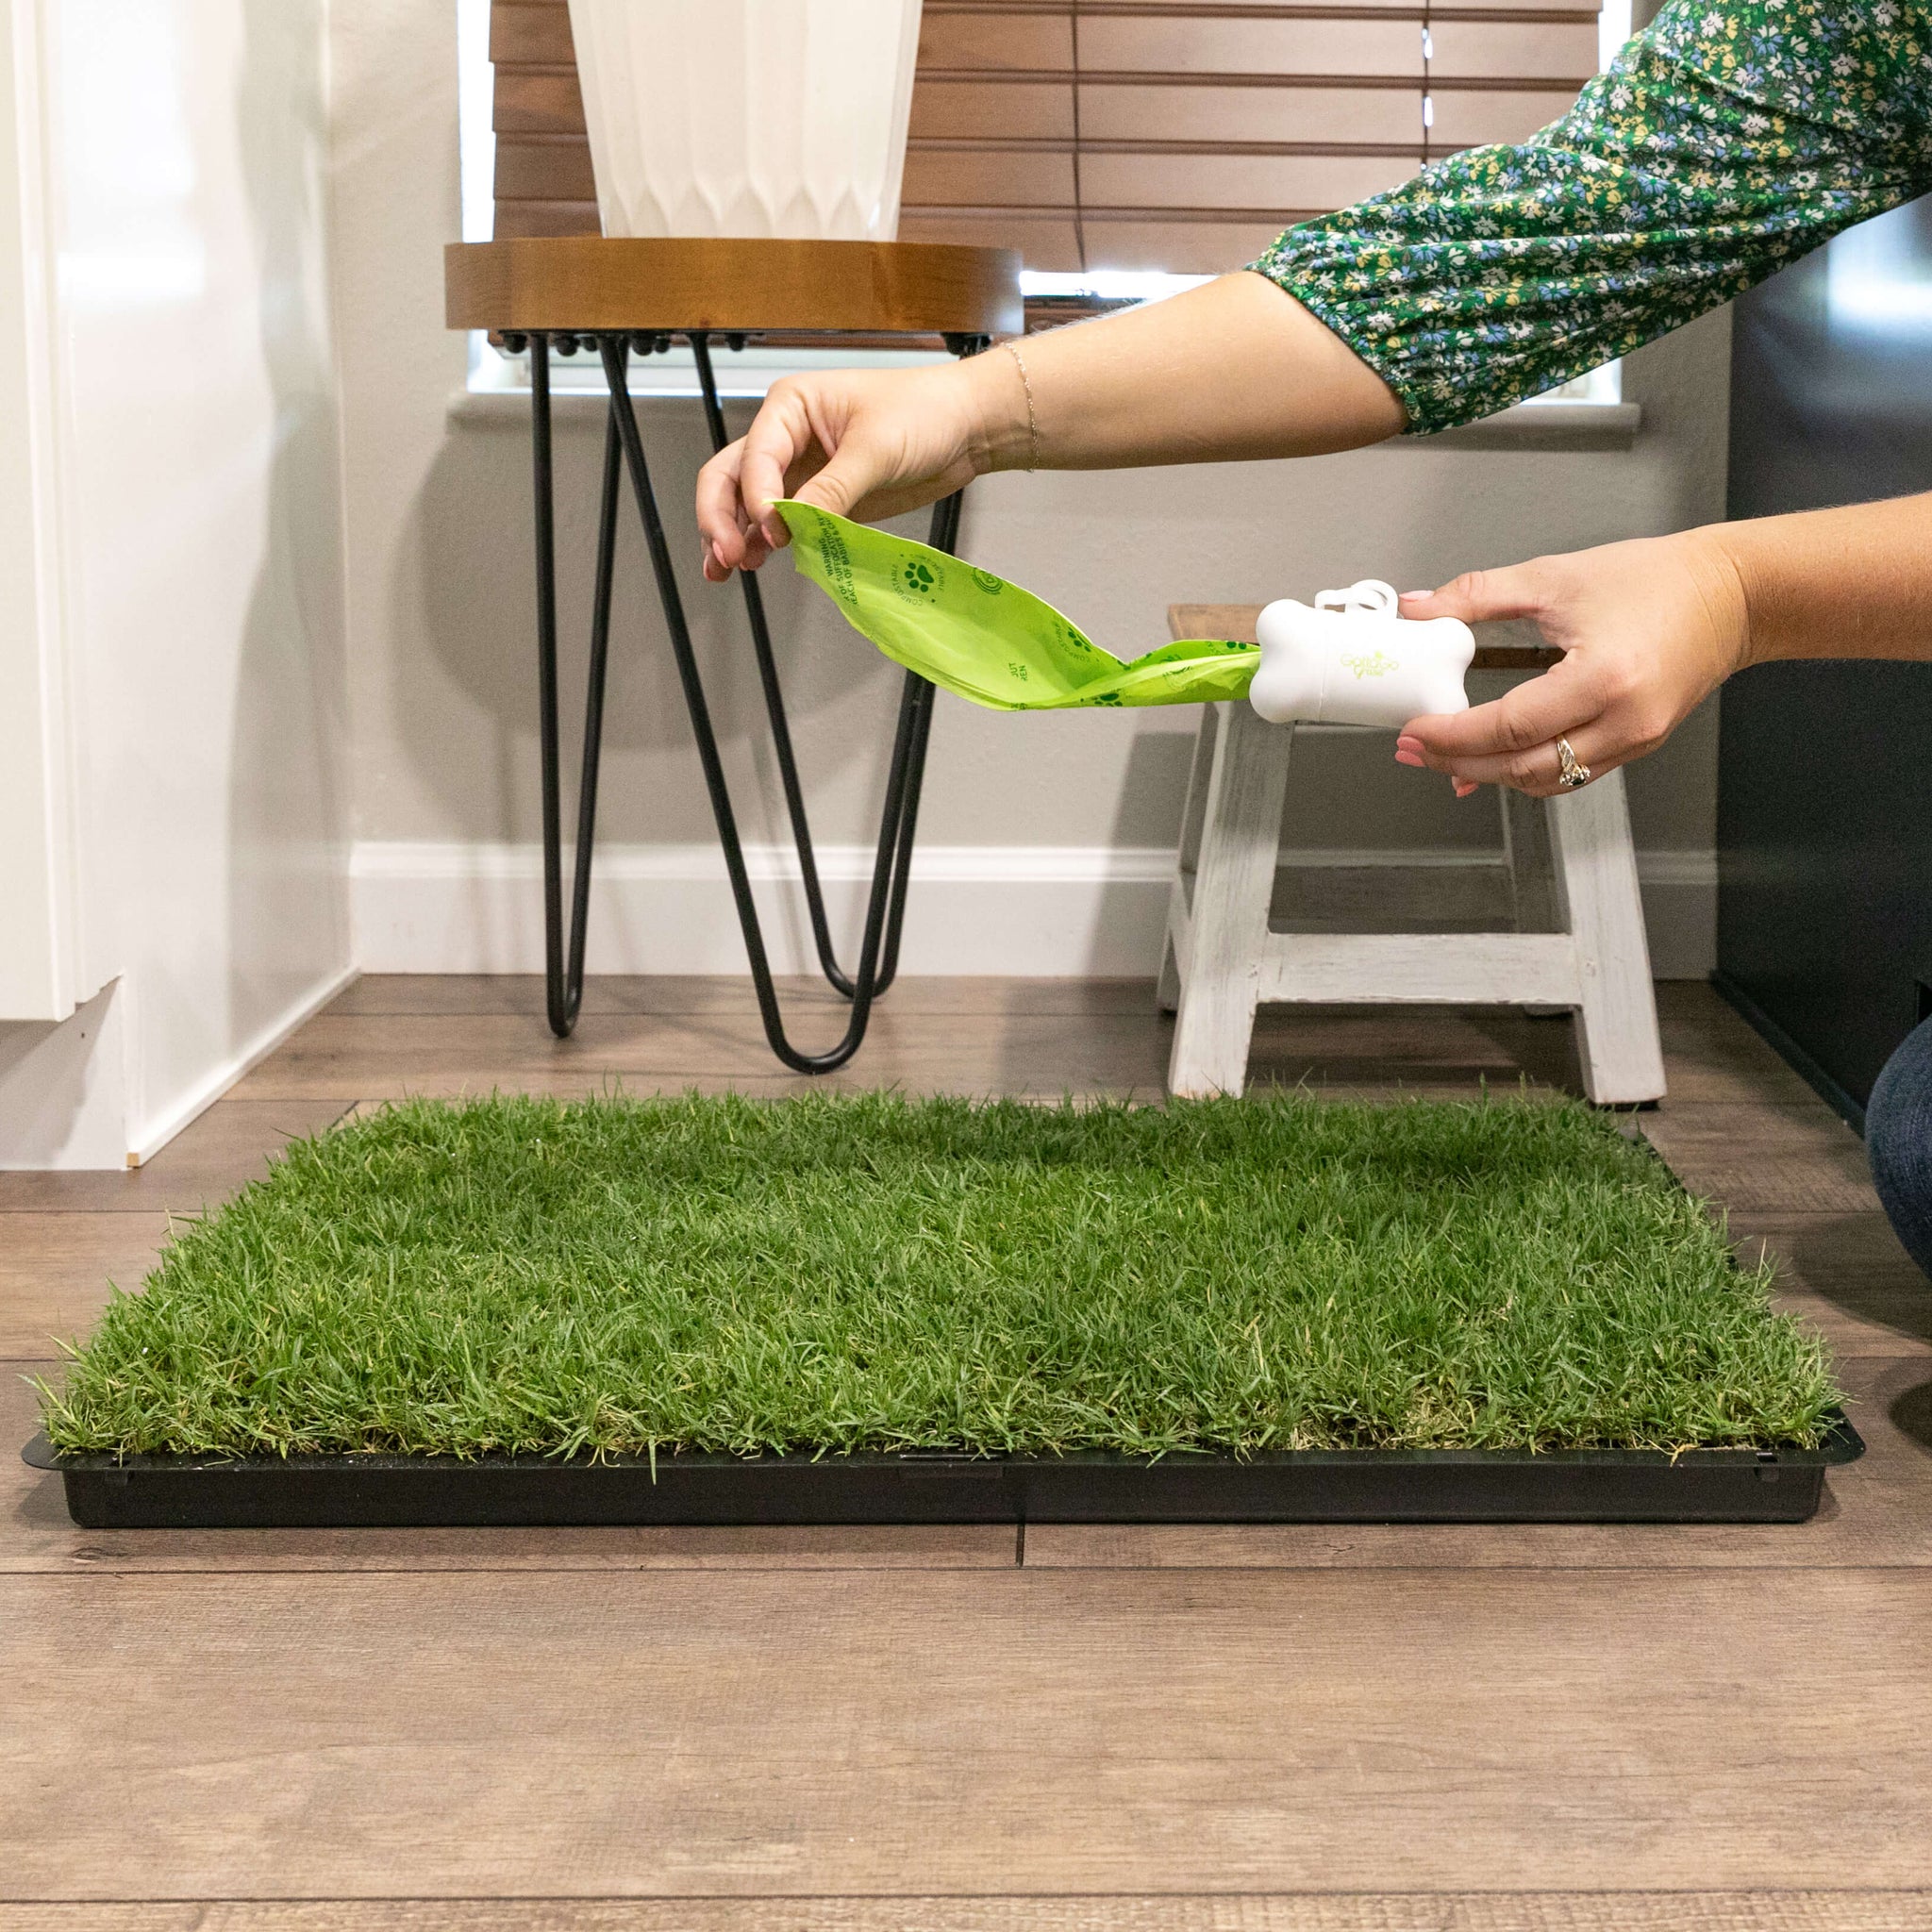 How to Set Up an Indoor Dog Waste Station Using Gotta Go Grass